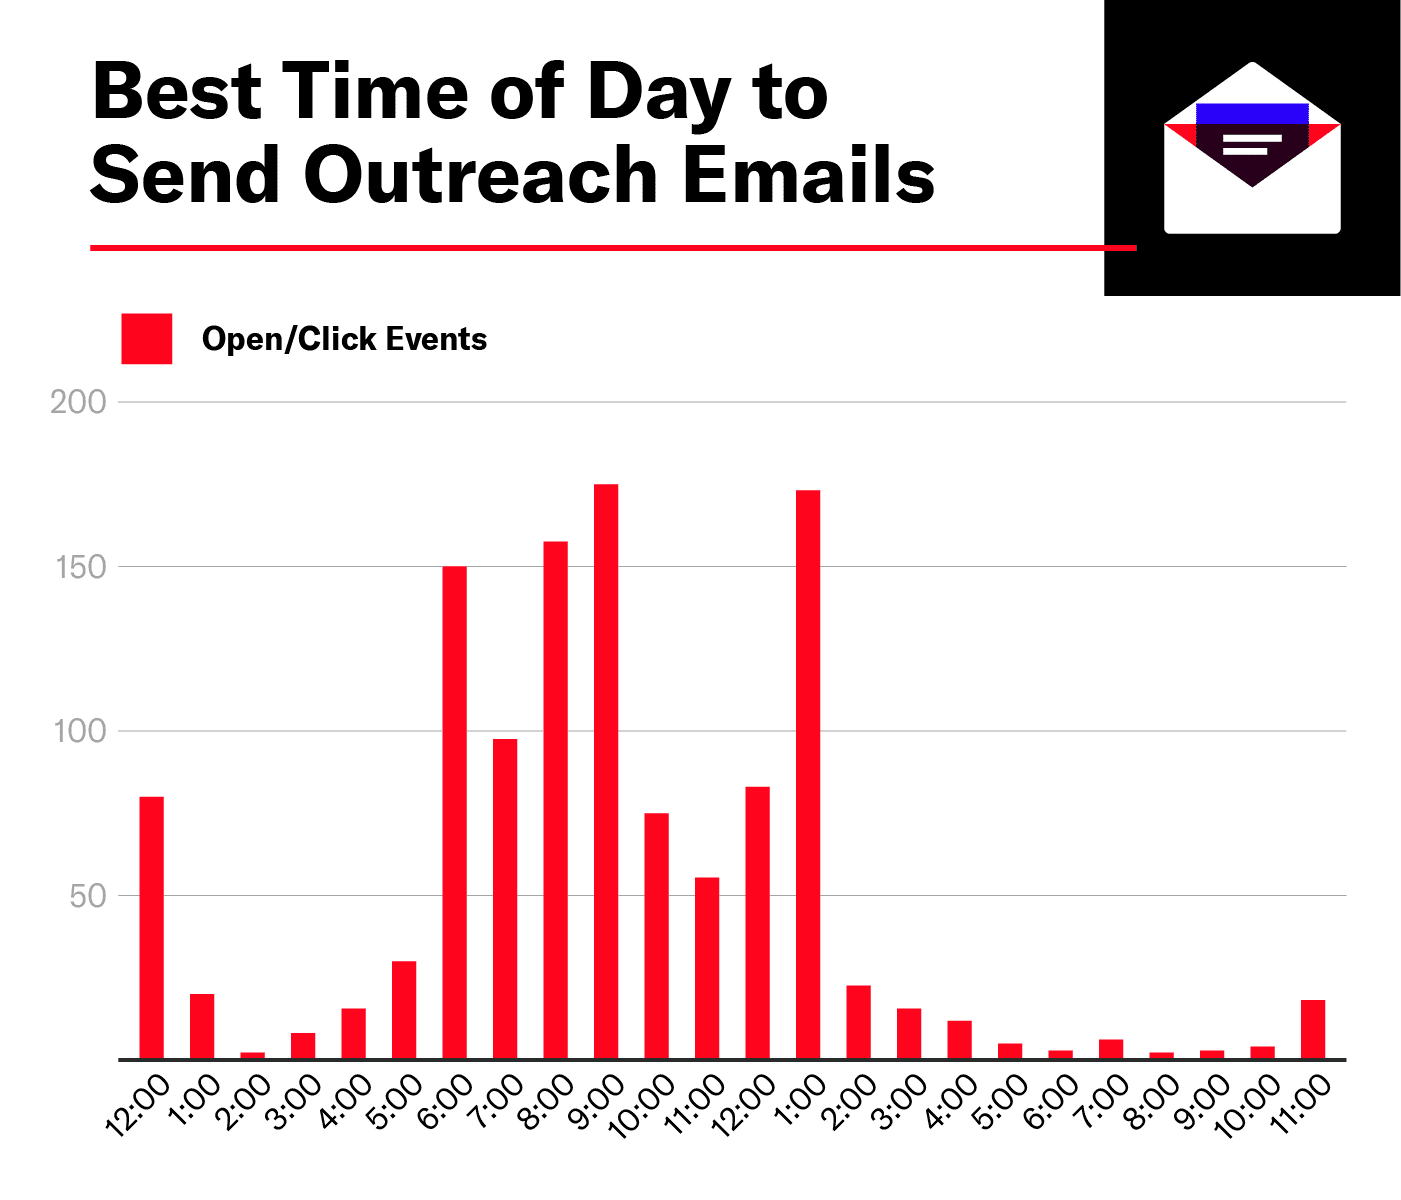 siege media study on best time of day to send email